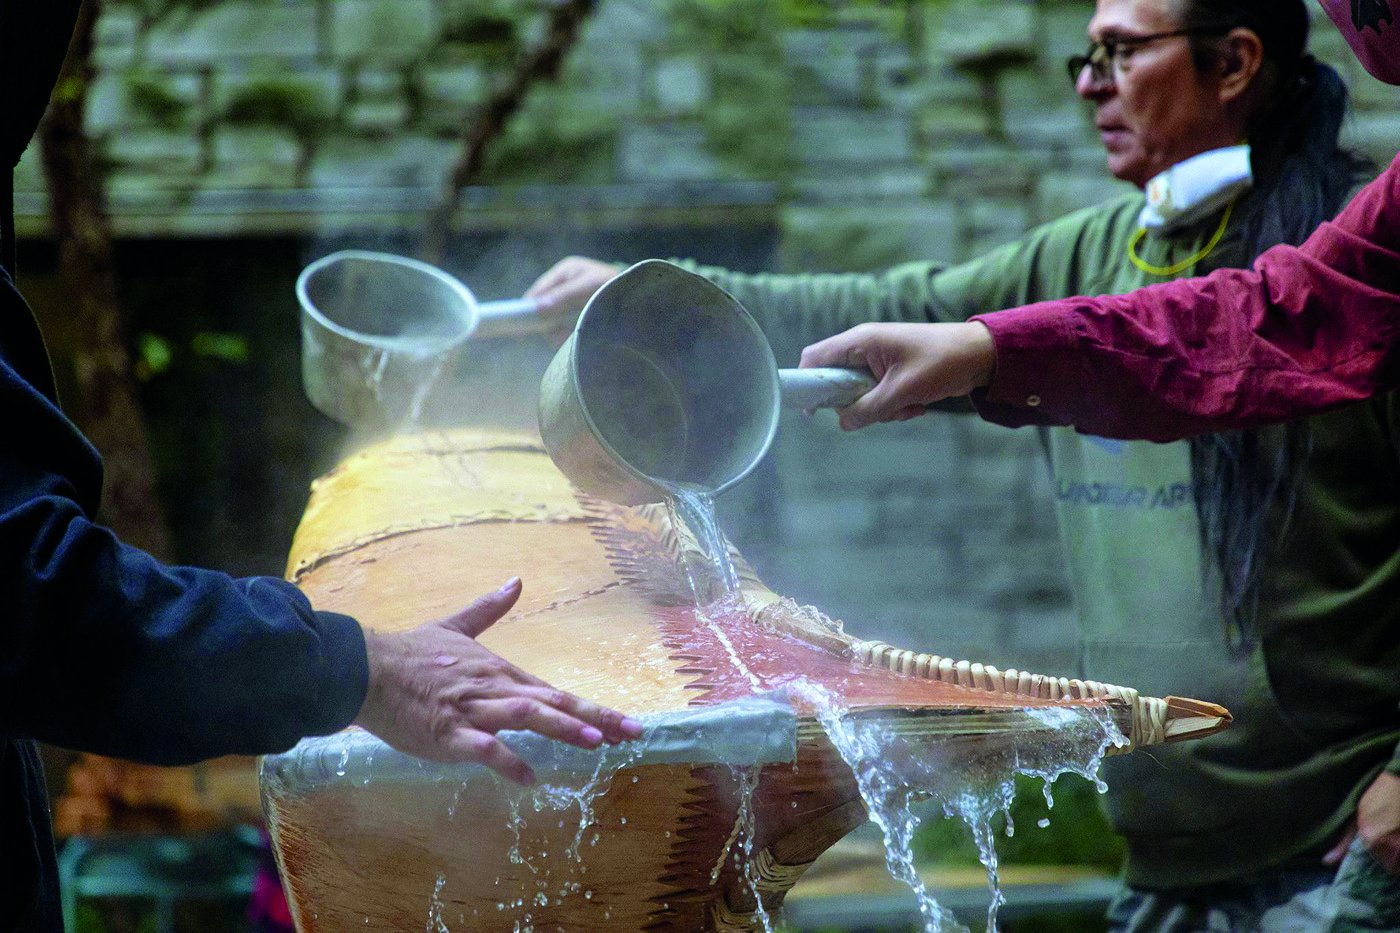 Group of people pours hot water to soften the wood used for constructing the canoe.